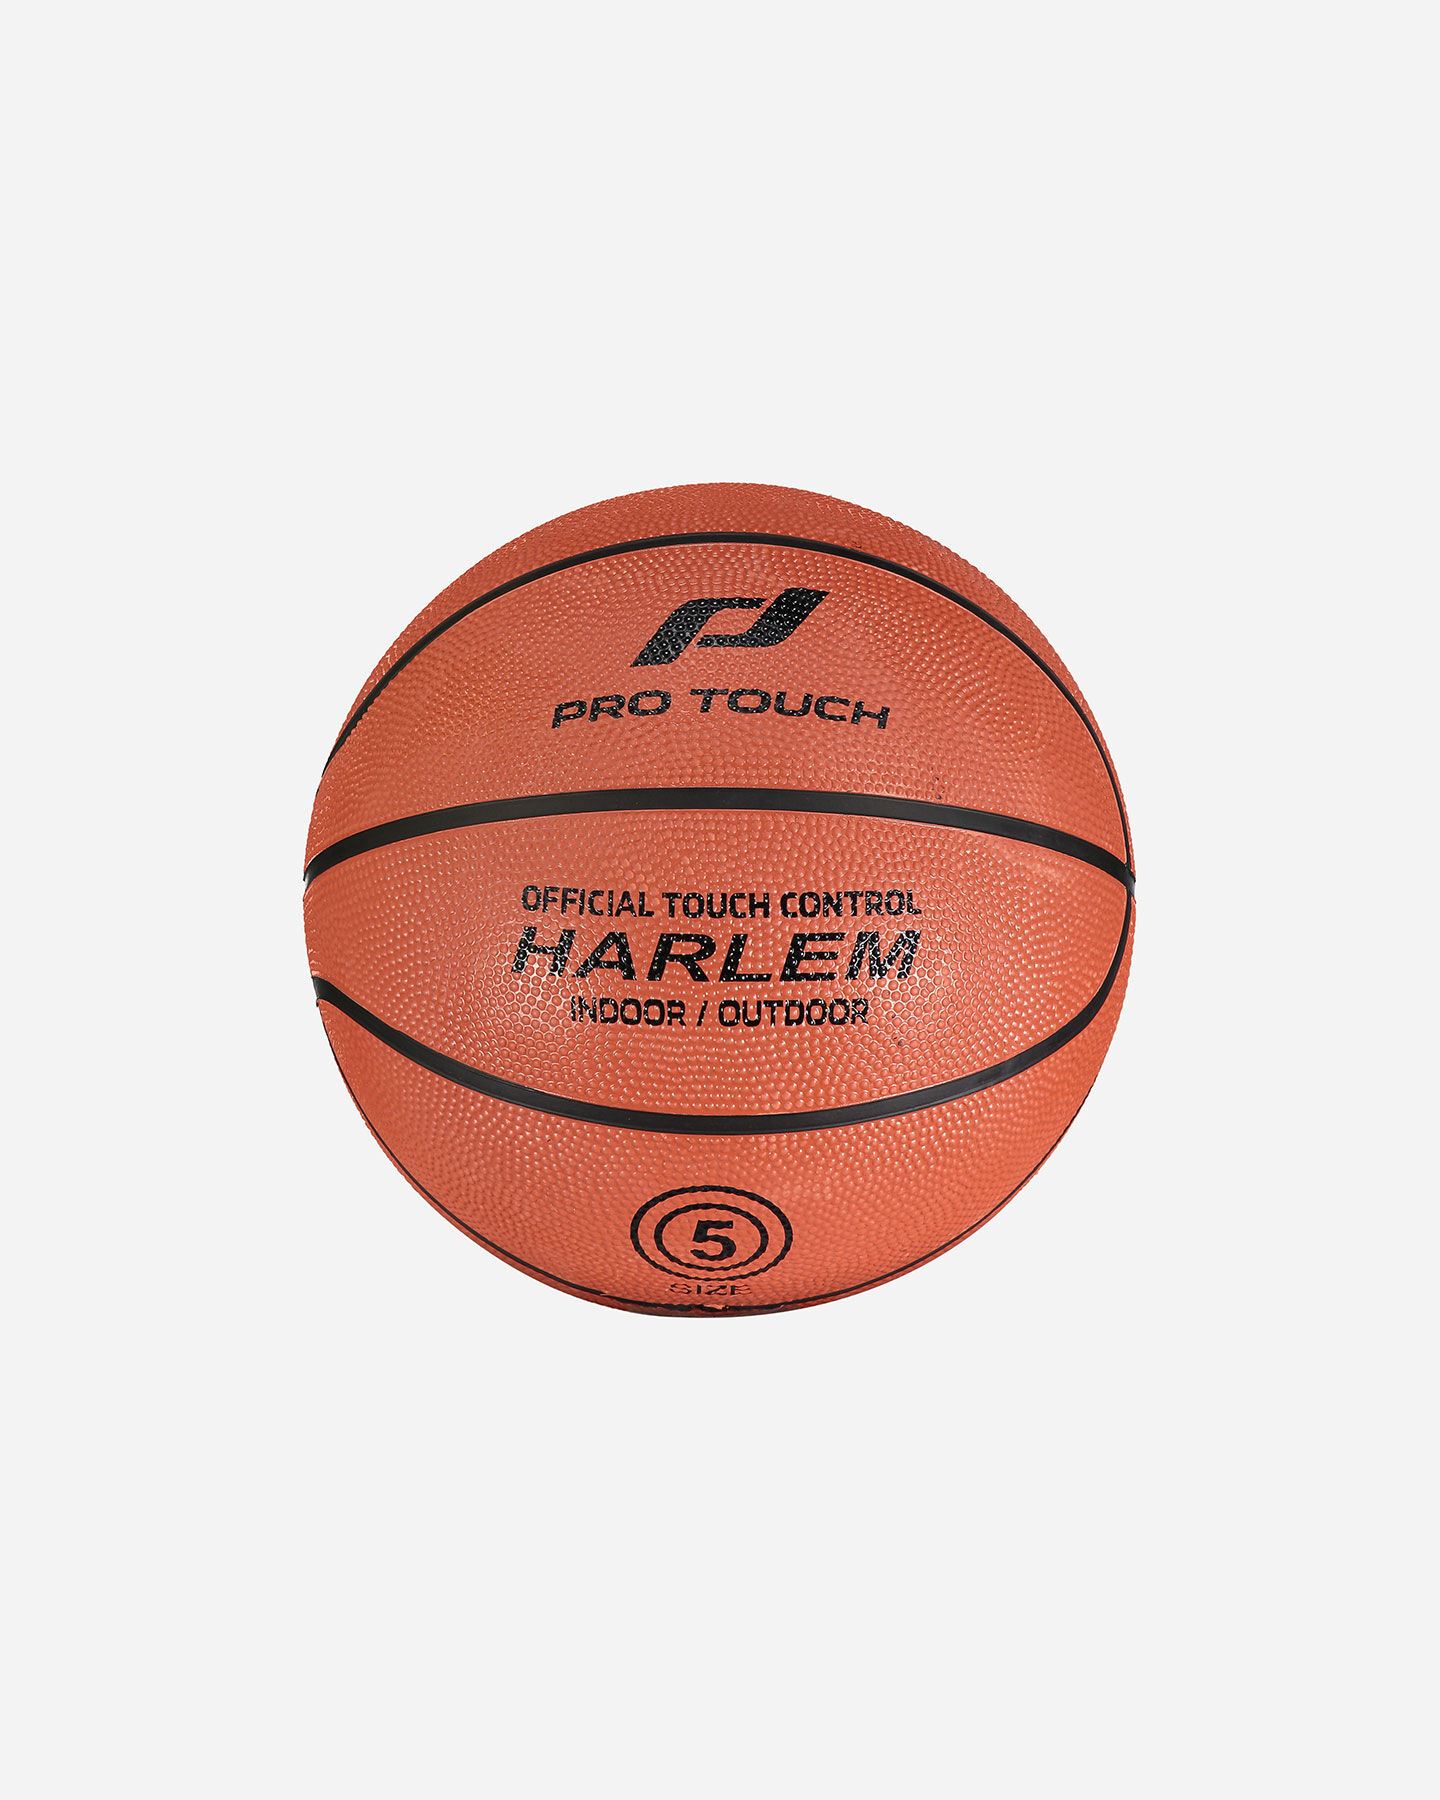  Pallone basket PRO TOUCH HARLEM MIS. 5 S1246134|973|UNI scatto 0